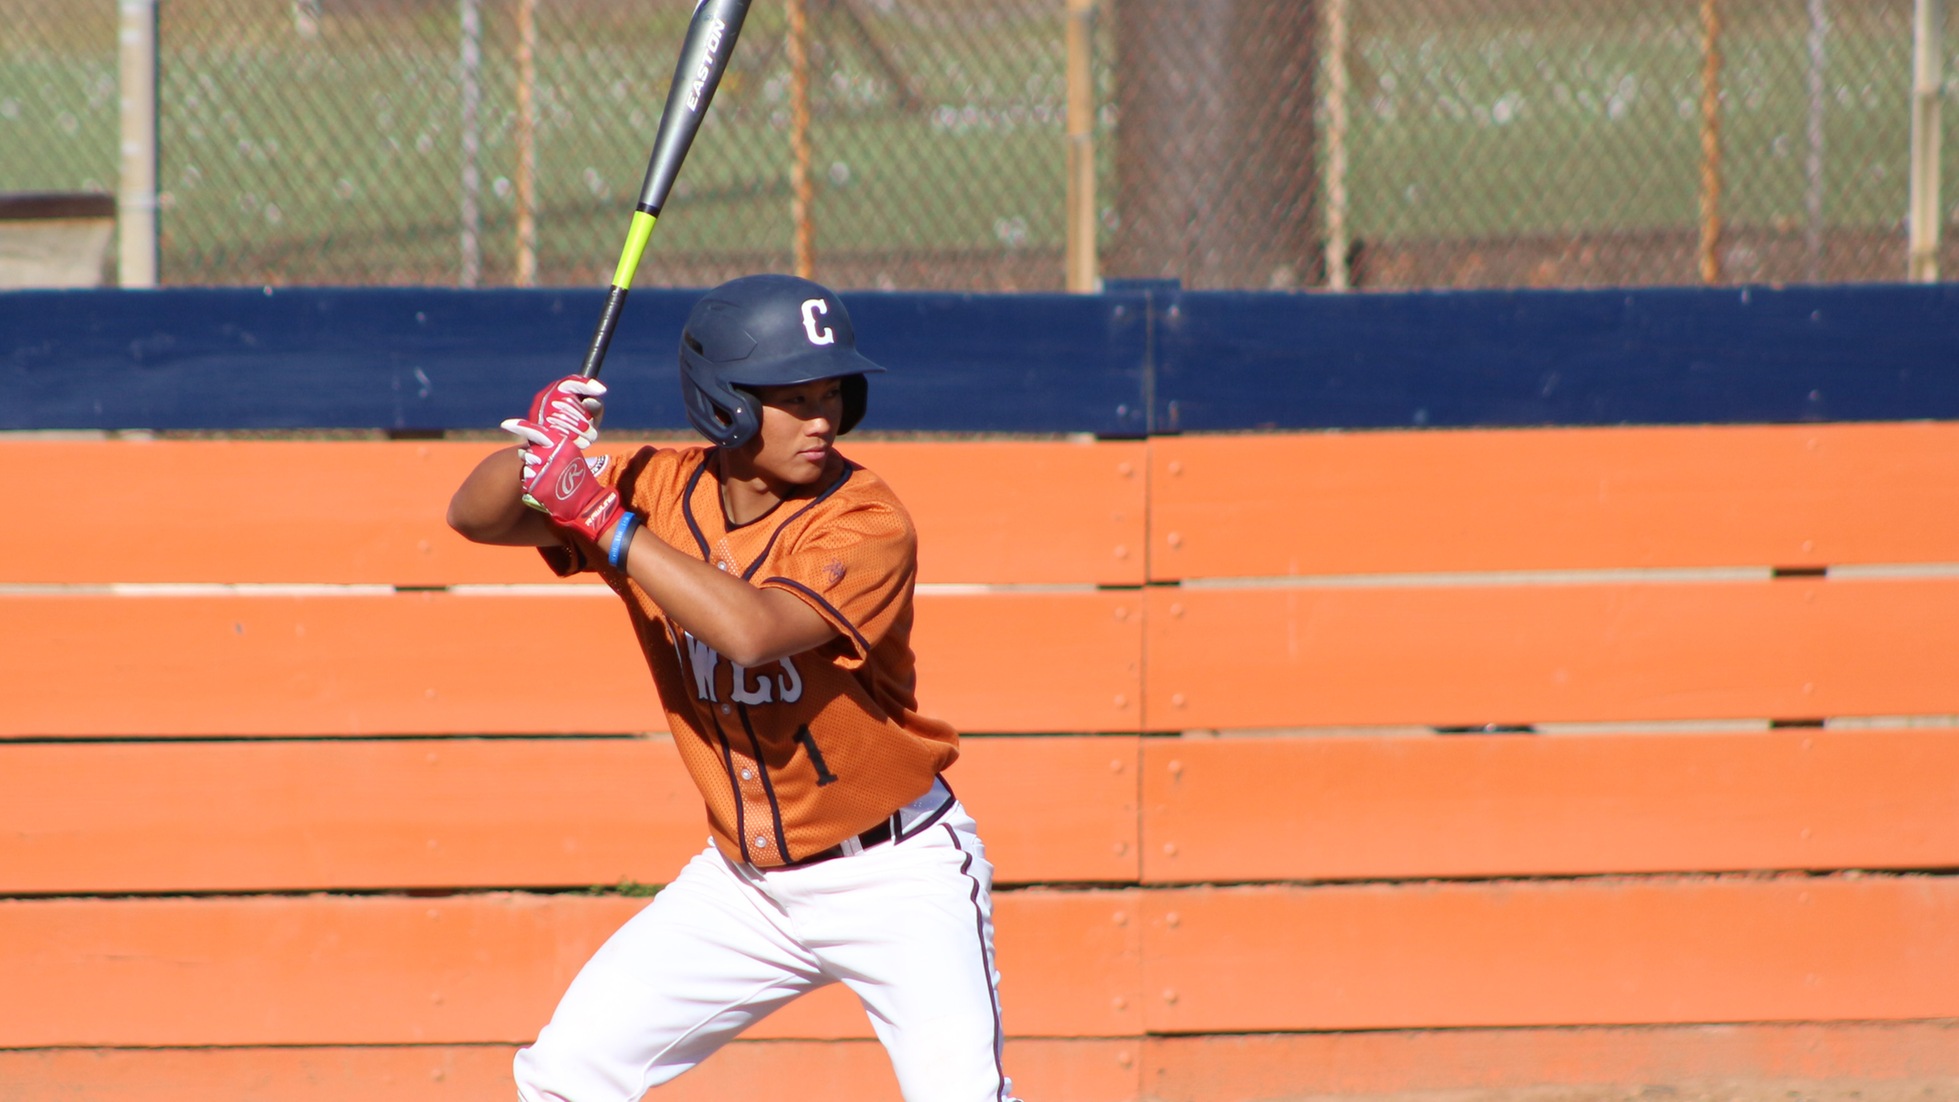 Go Hattori was 2-for-4 with an RBI against San Bernardino Valley. Photo by: Brian Cone